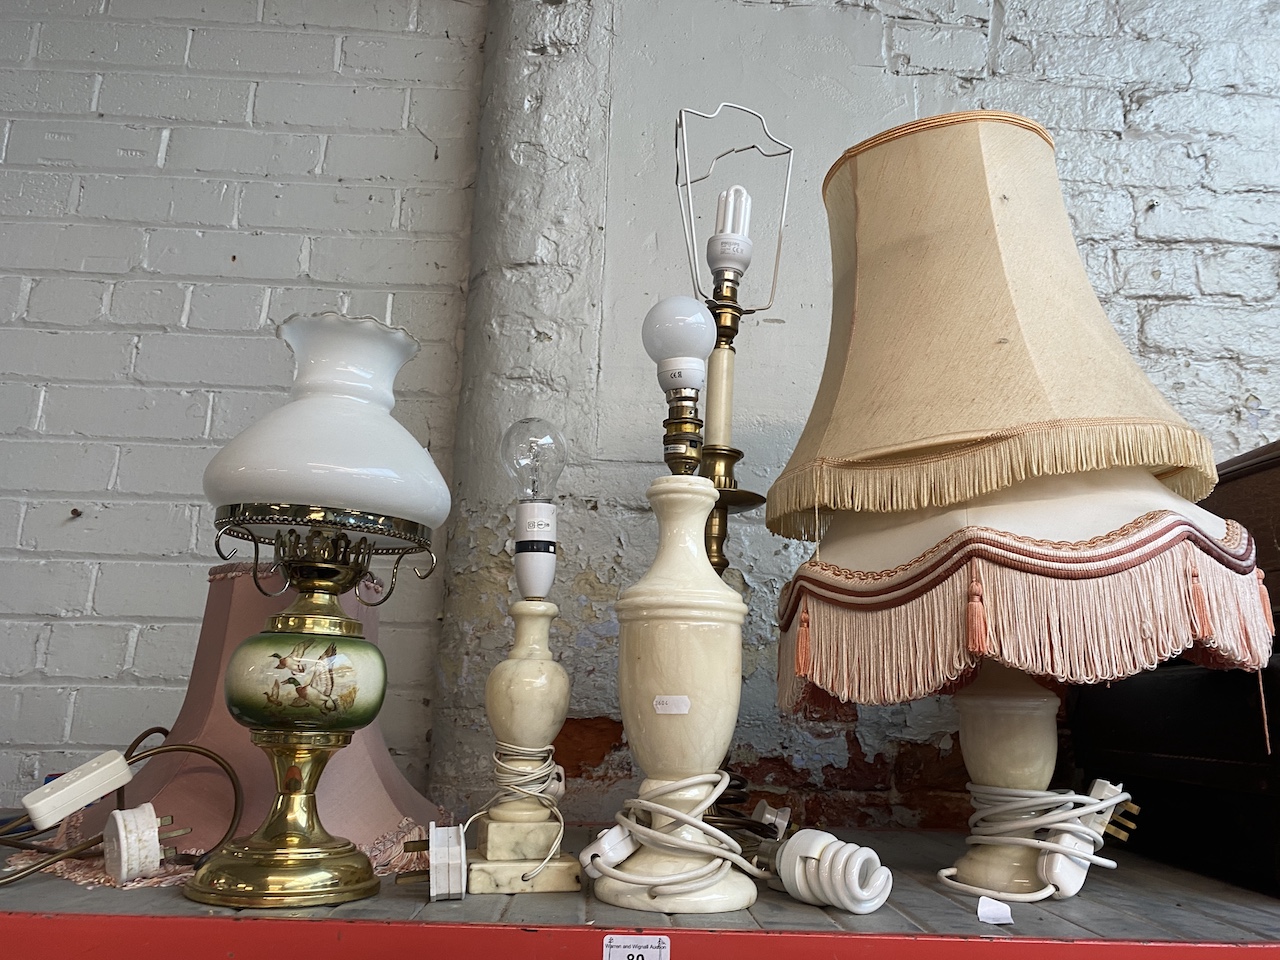 A collection of lamps to include onyx, brass and pottery.